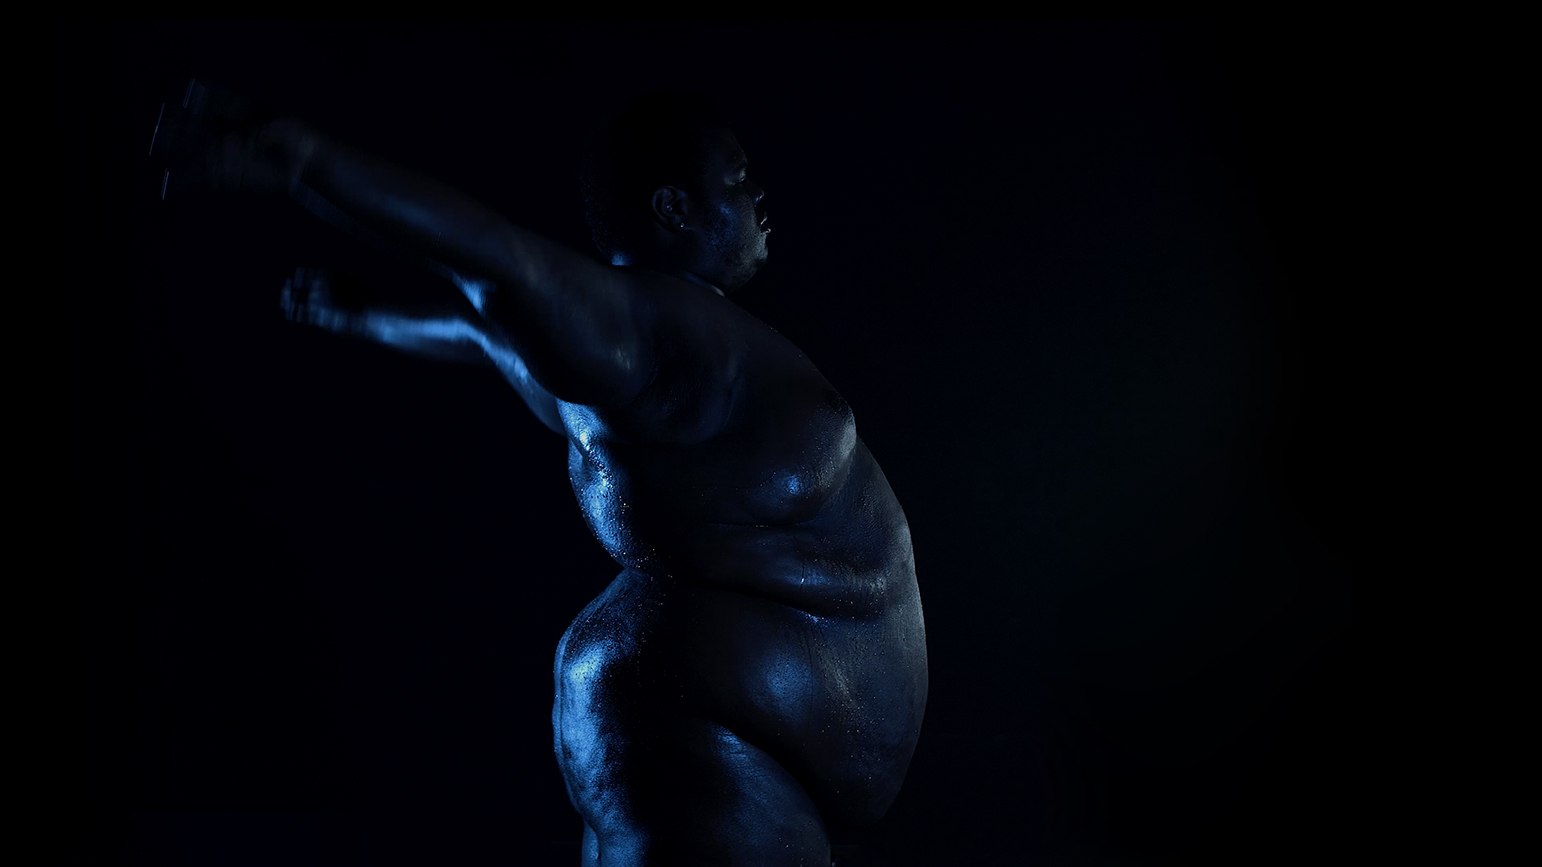 Video still of a nude figure in very low lighting from the side with arms reaching backward